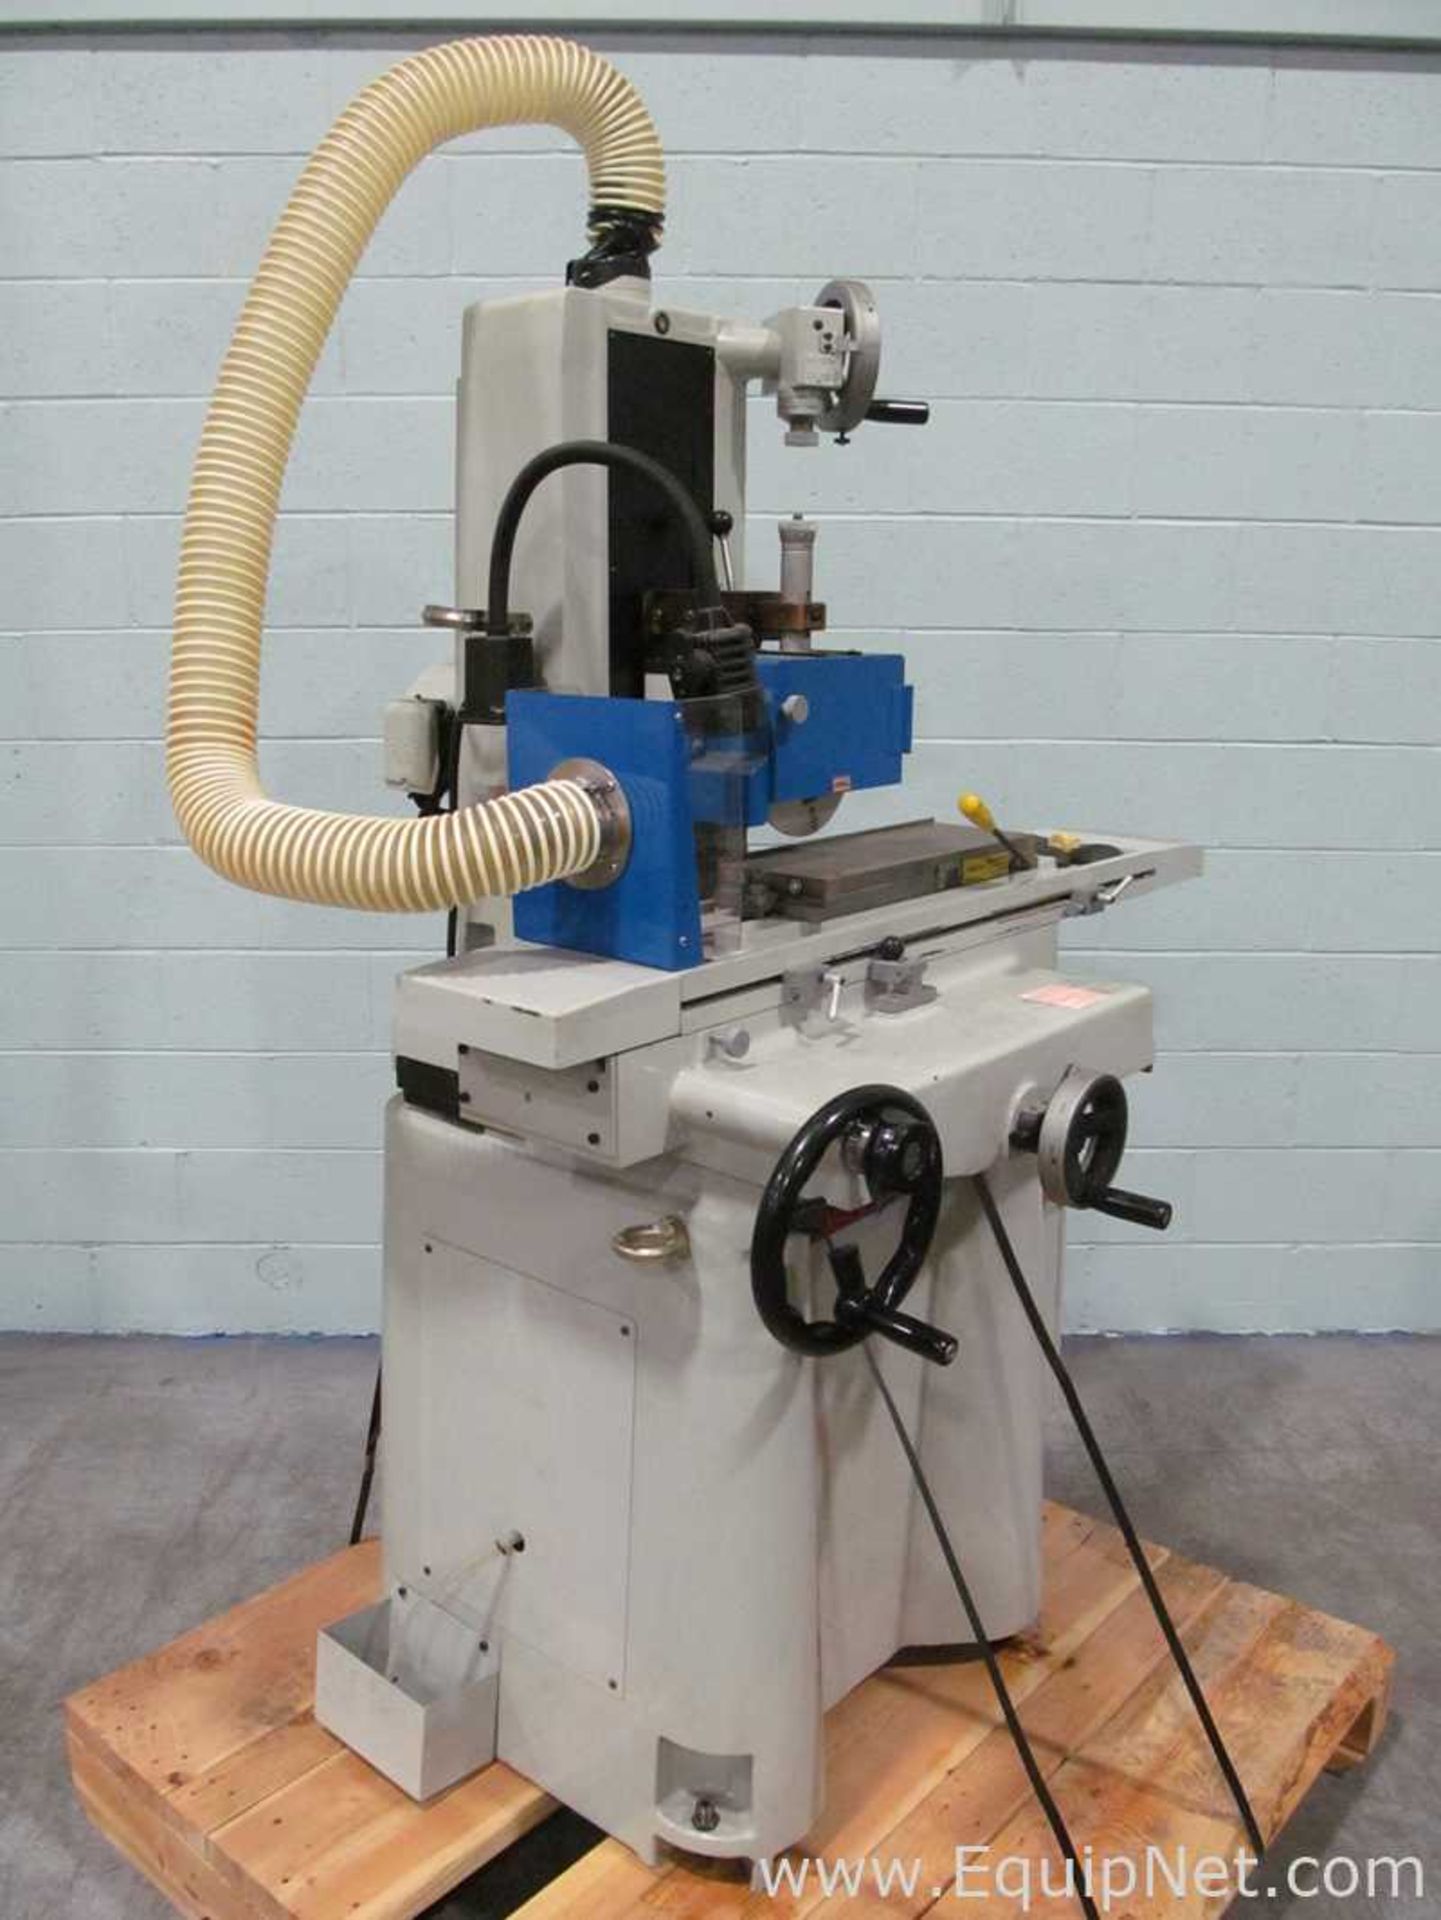 Vectrax JL-618MB 8 Inch Wheel Surface Grinder With Integrated Dust-Suction Cooling System - Image 8 of 15